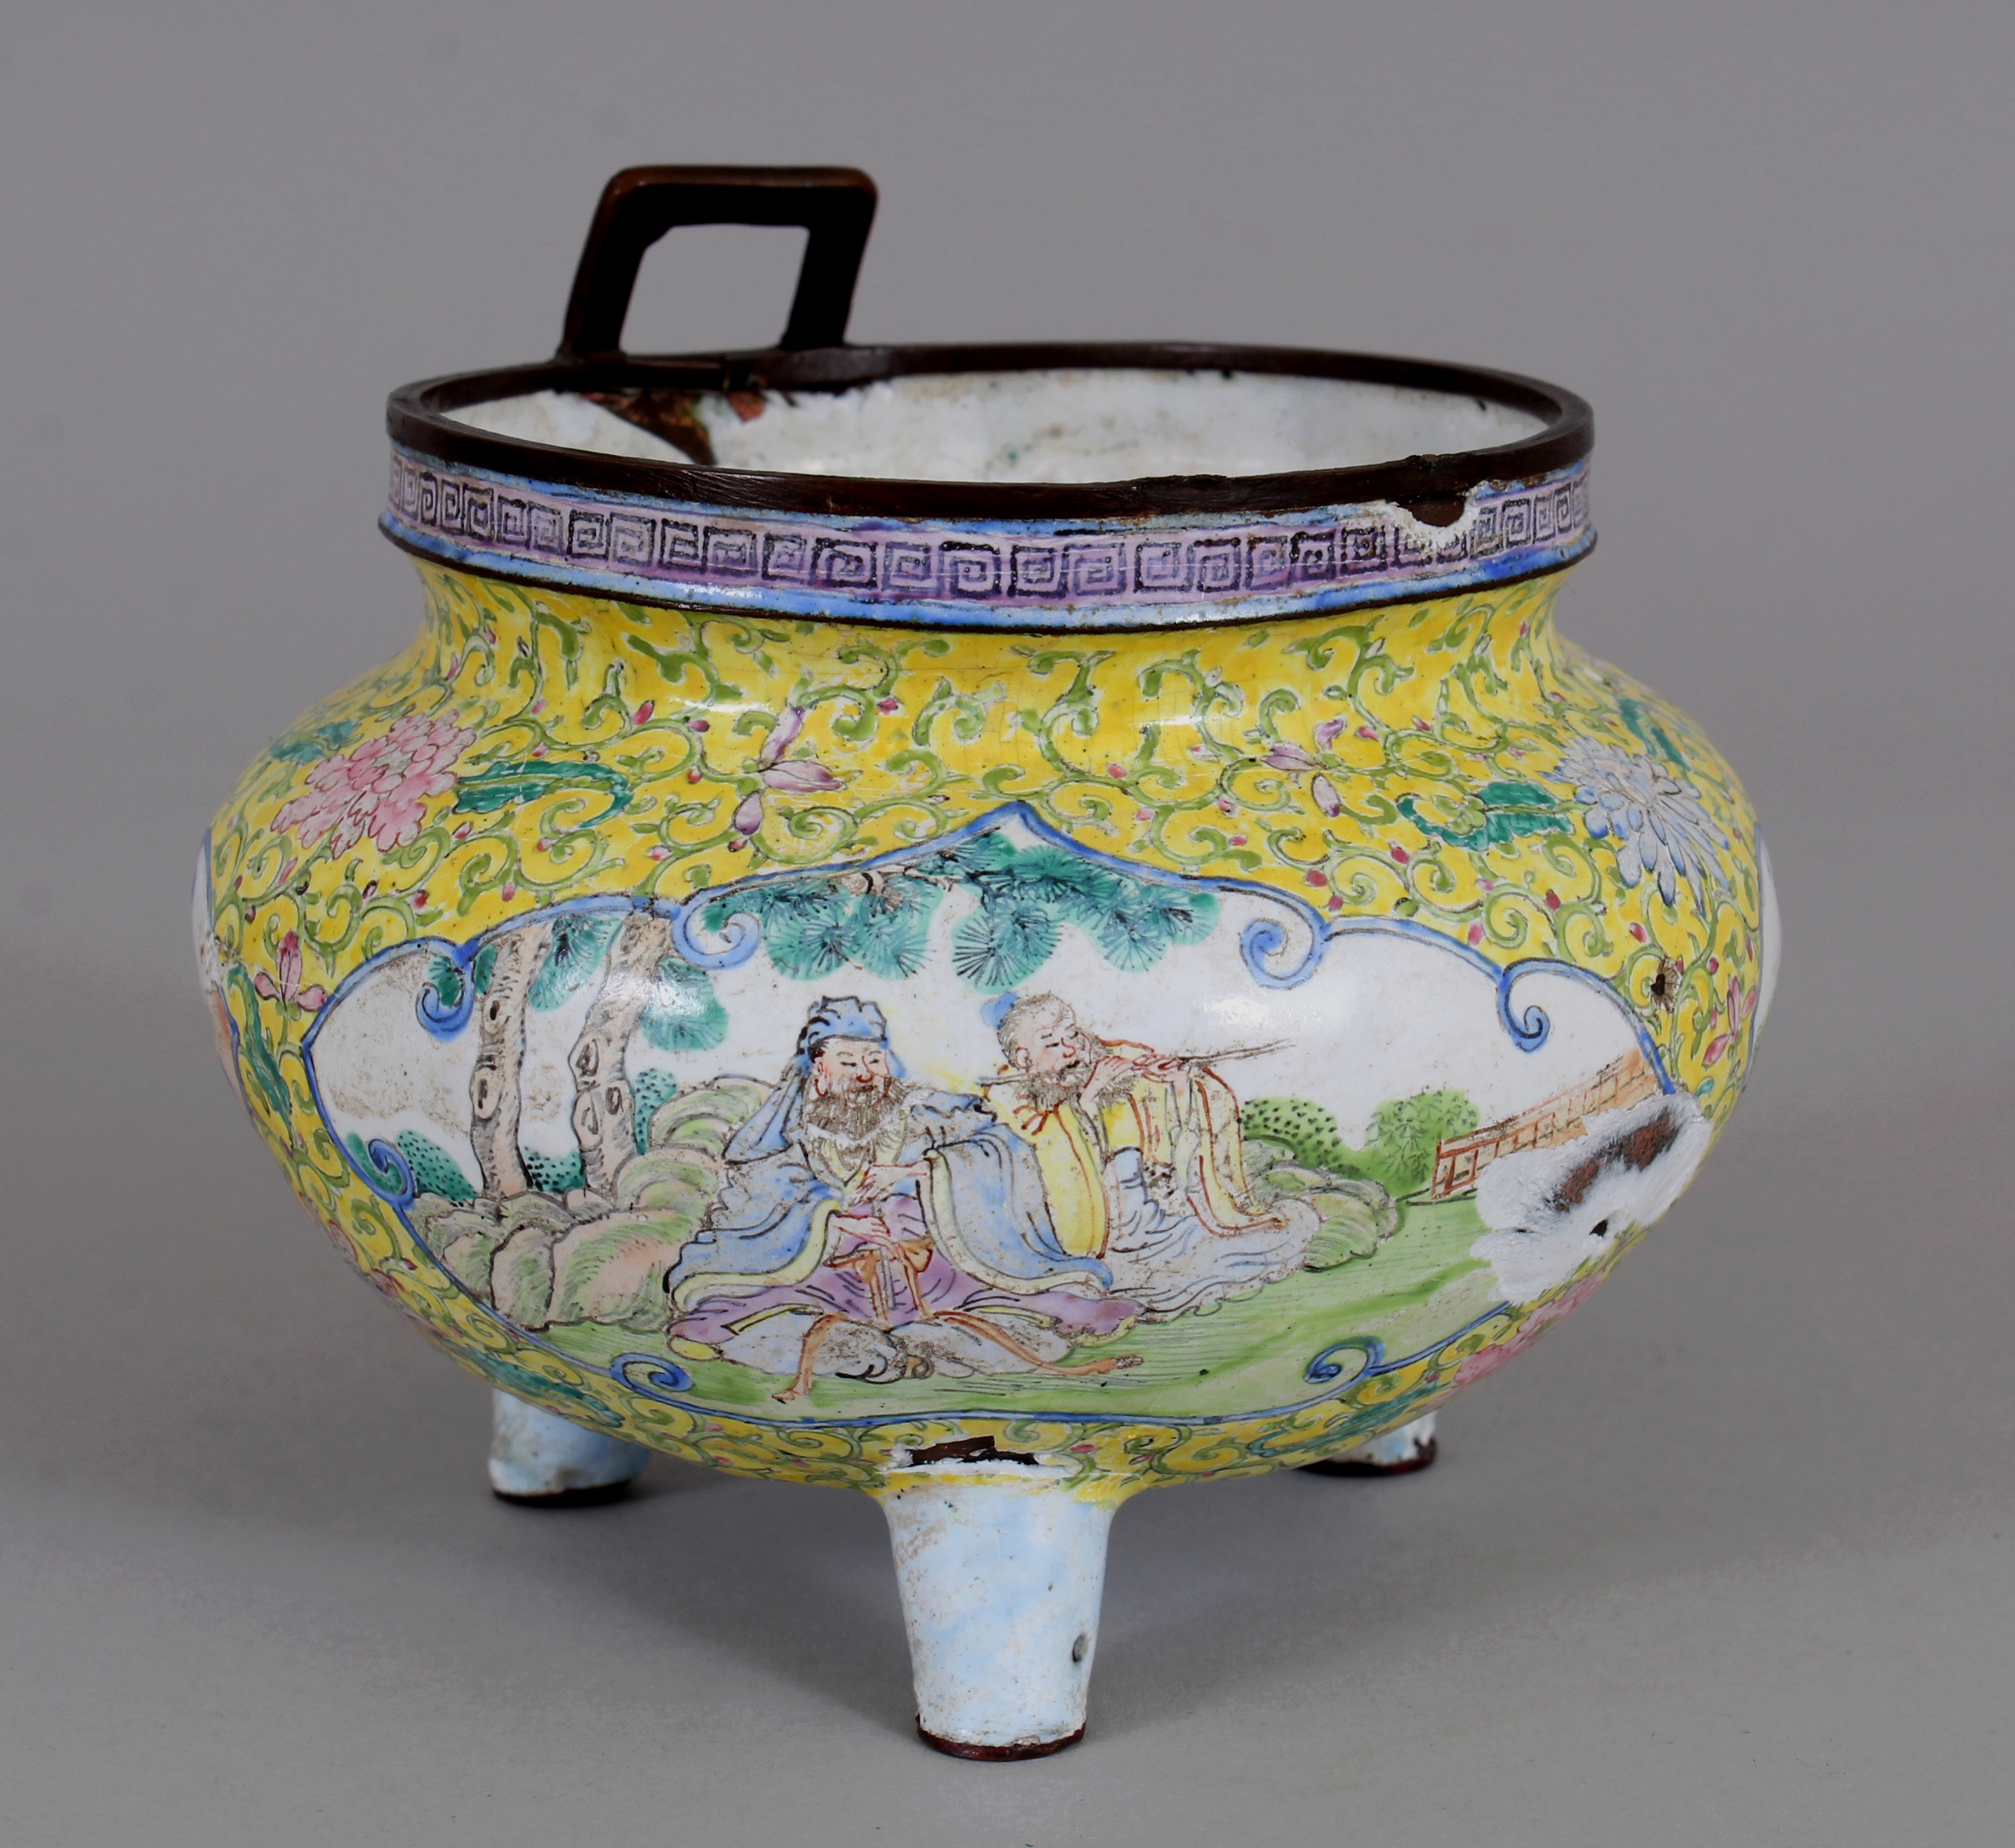 AN UNUSUAL 18TH/19TH CENTURY CHINESE YELLOW GROUND CANTON ENAMEL TRIPOD CENSER, decorated with